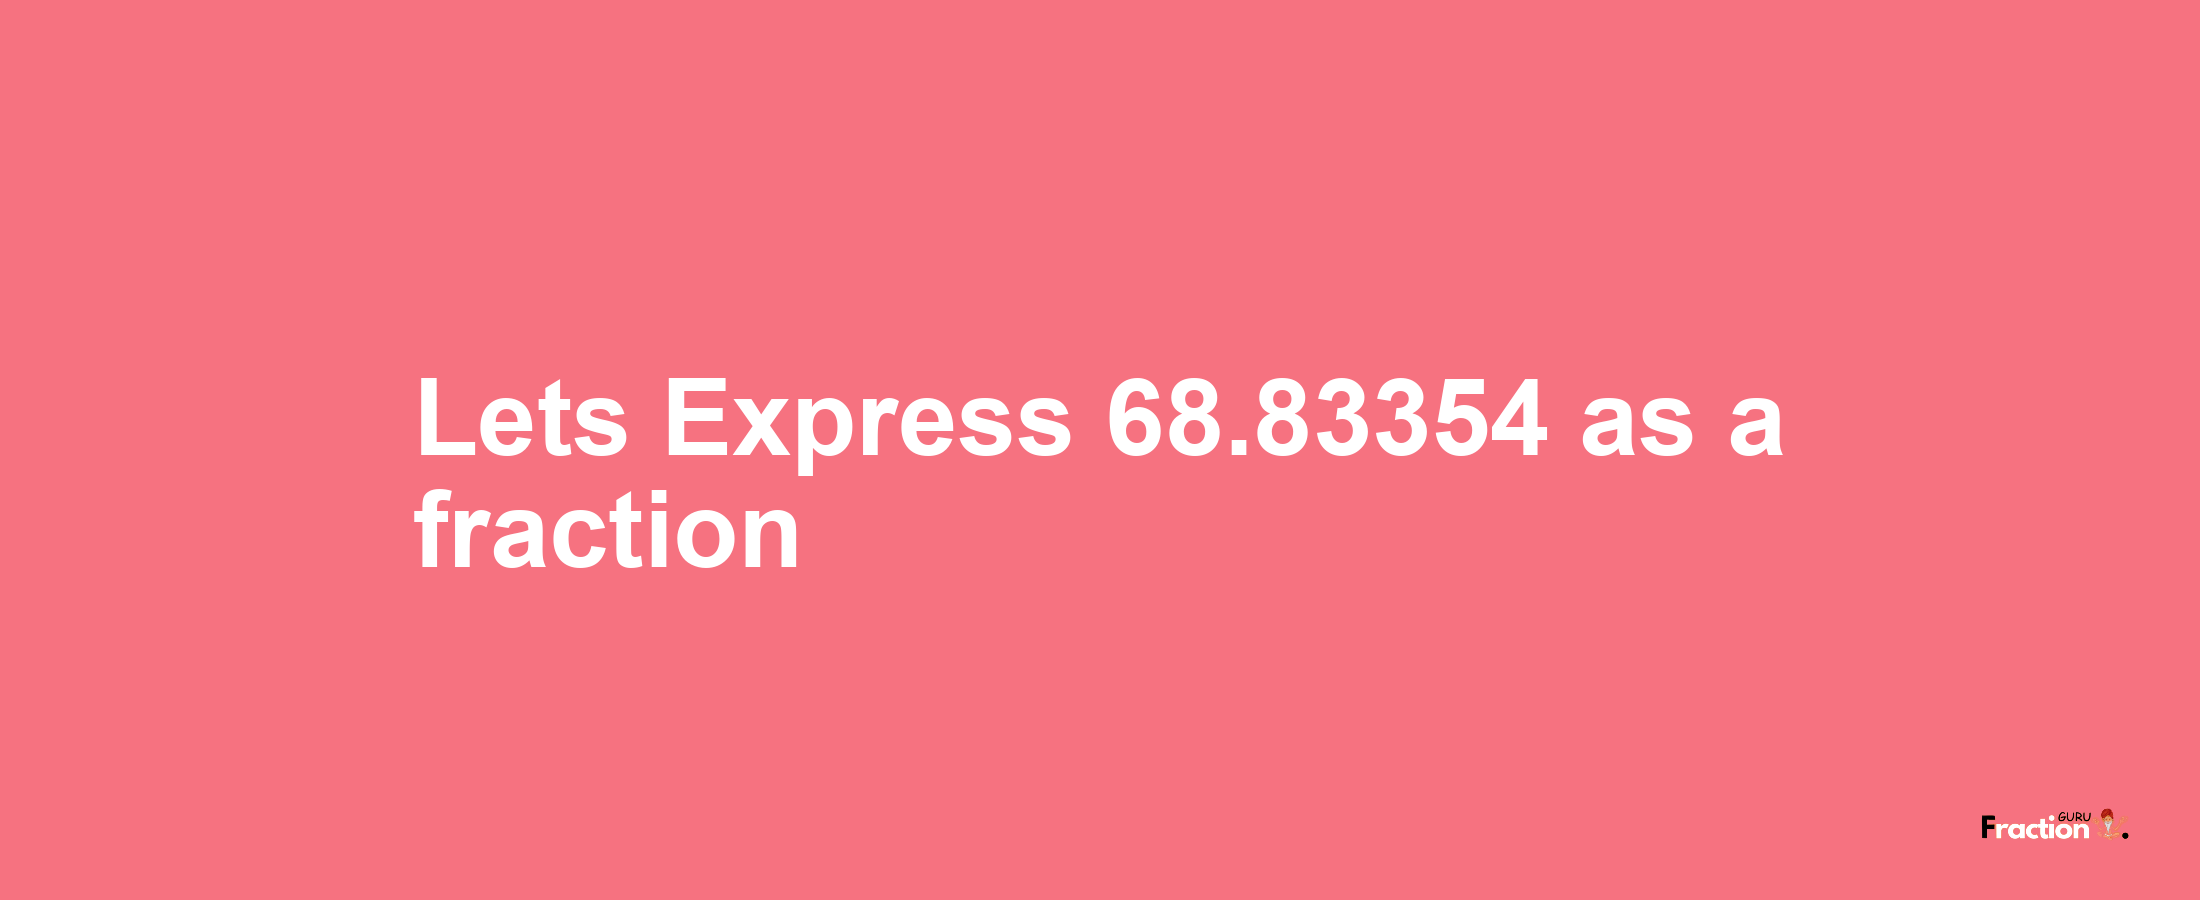 Lets Express 68.83354 as afraction